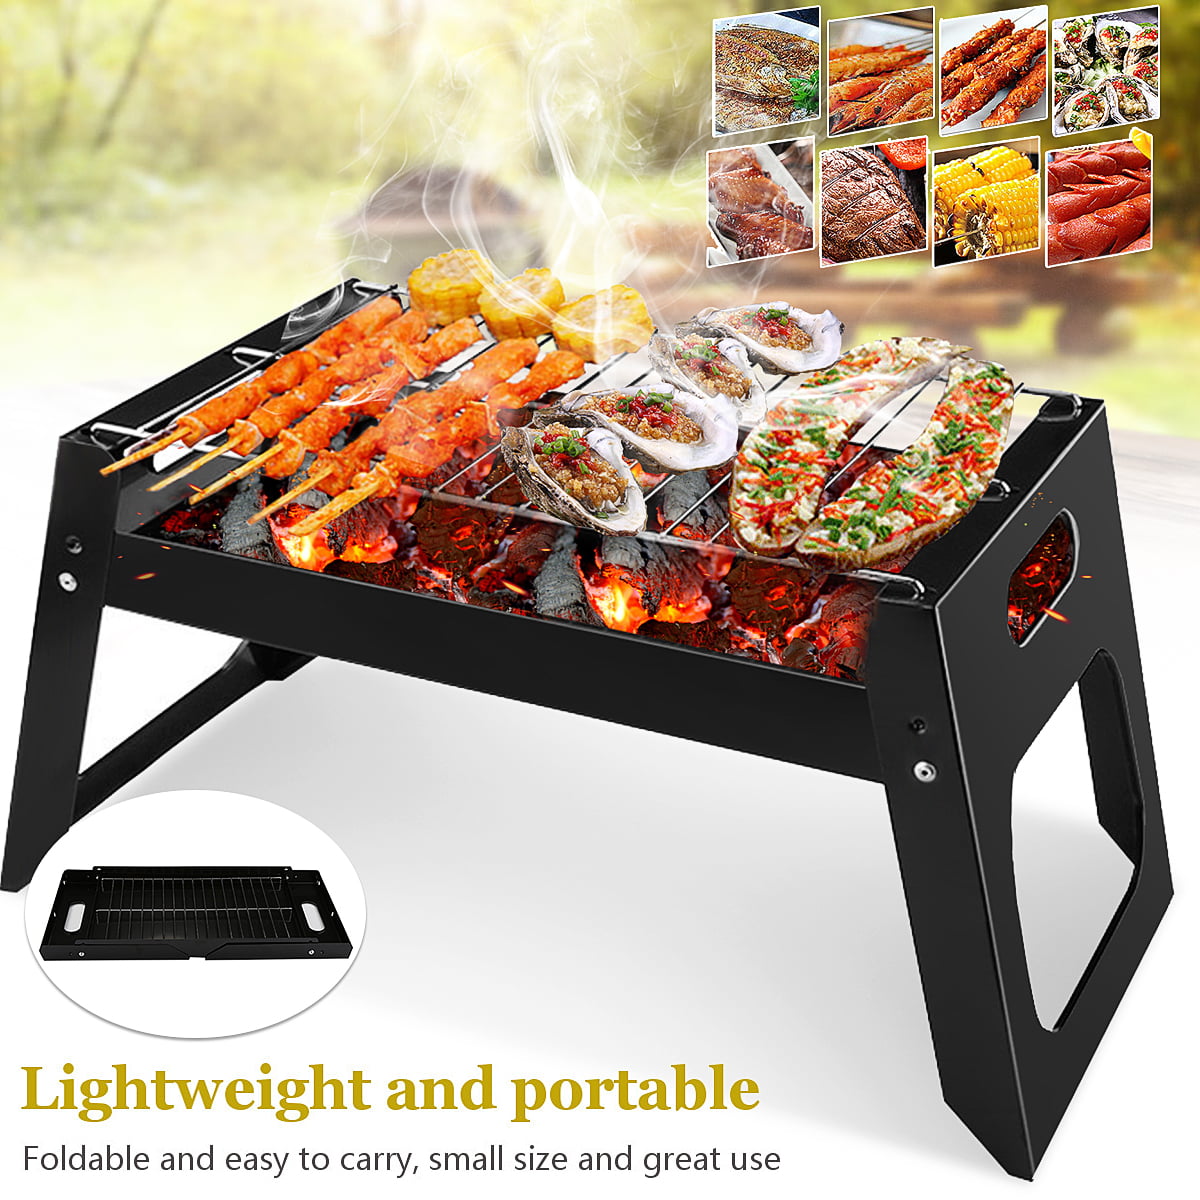 Barbecue Charcoal Grill Portable Grill Party Outdoor Camping Garden Stove Smoker Grill Foldable Lightweight，S Size 35 x 27 x 20 cm 